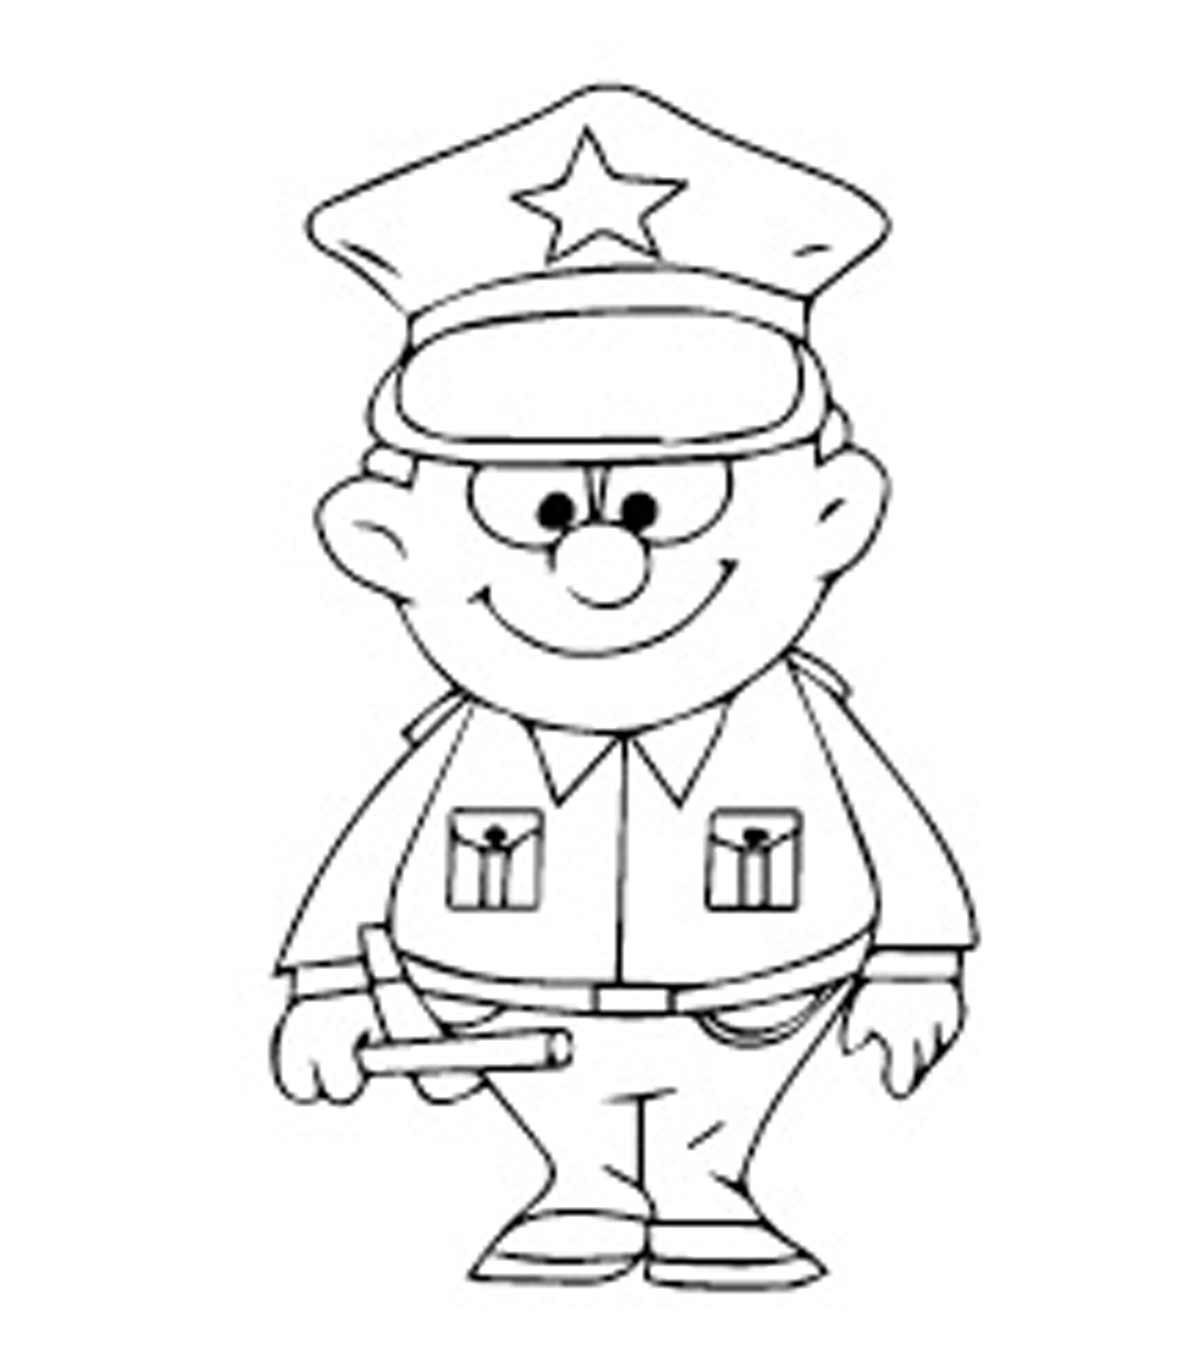 10 Best Police & Police Car Coloring Pages Your Toddler Will Love_image